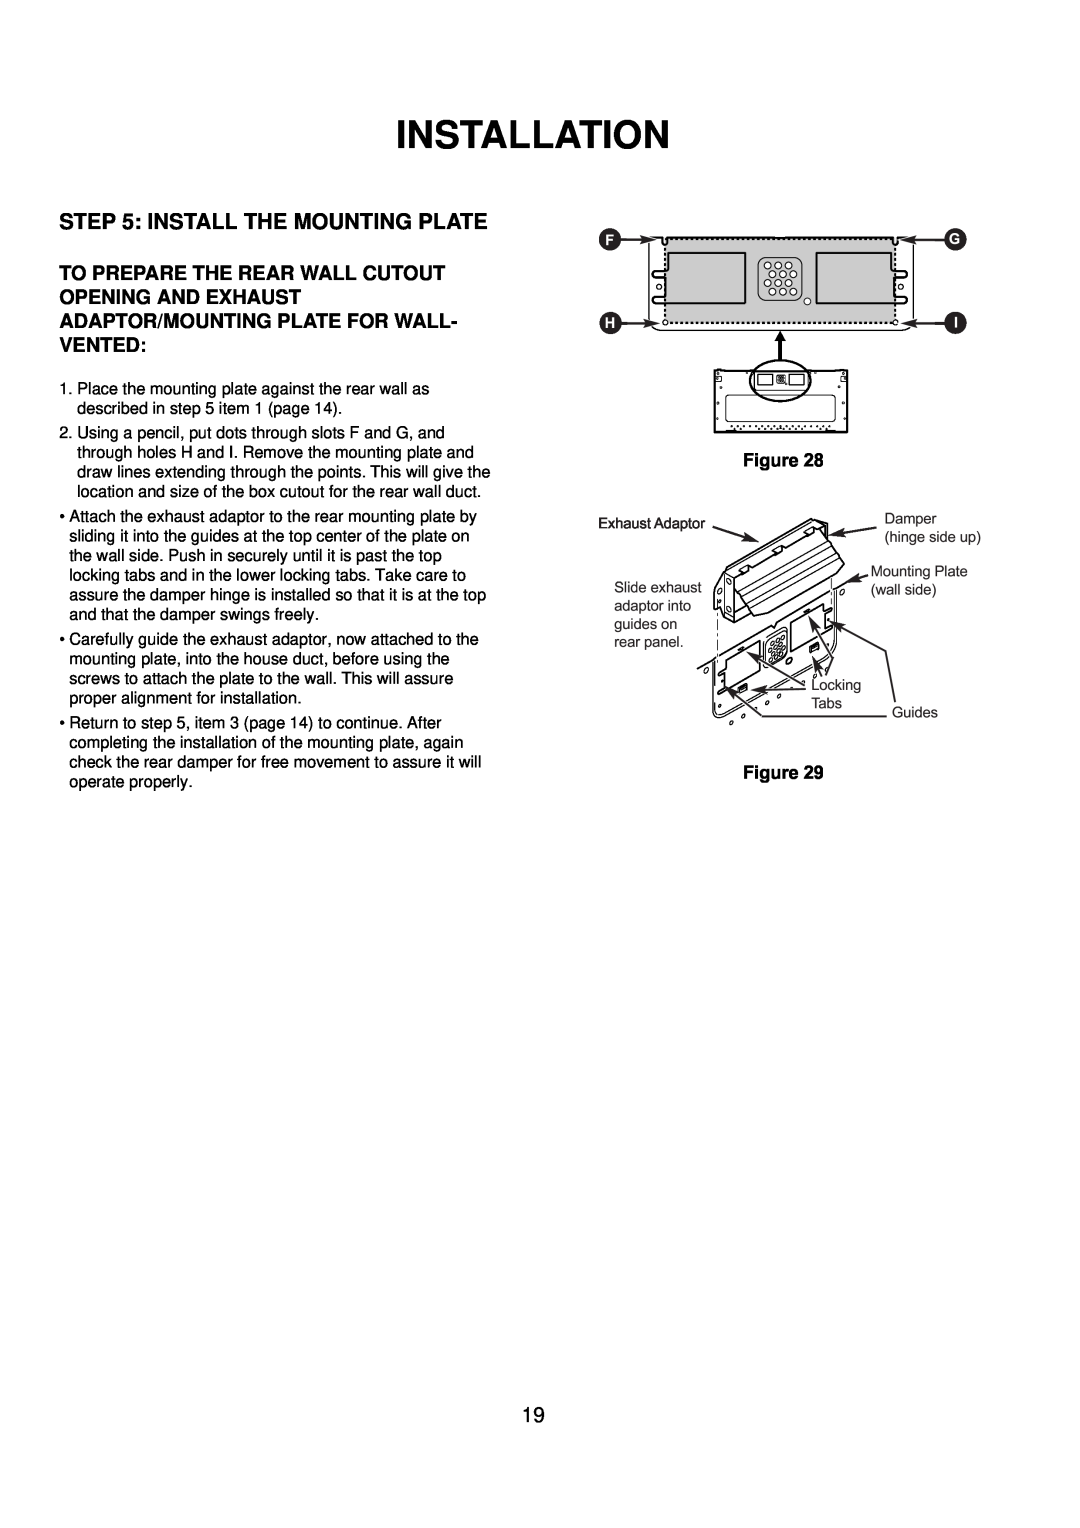 Amana ACO1520A important safety instructions Installation, Install The Mounting Plate, Figure 